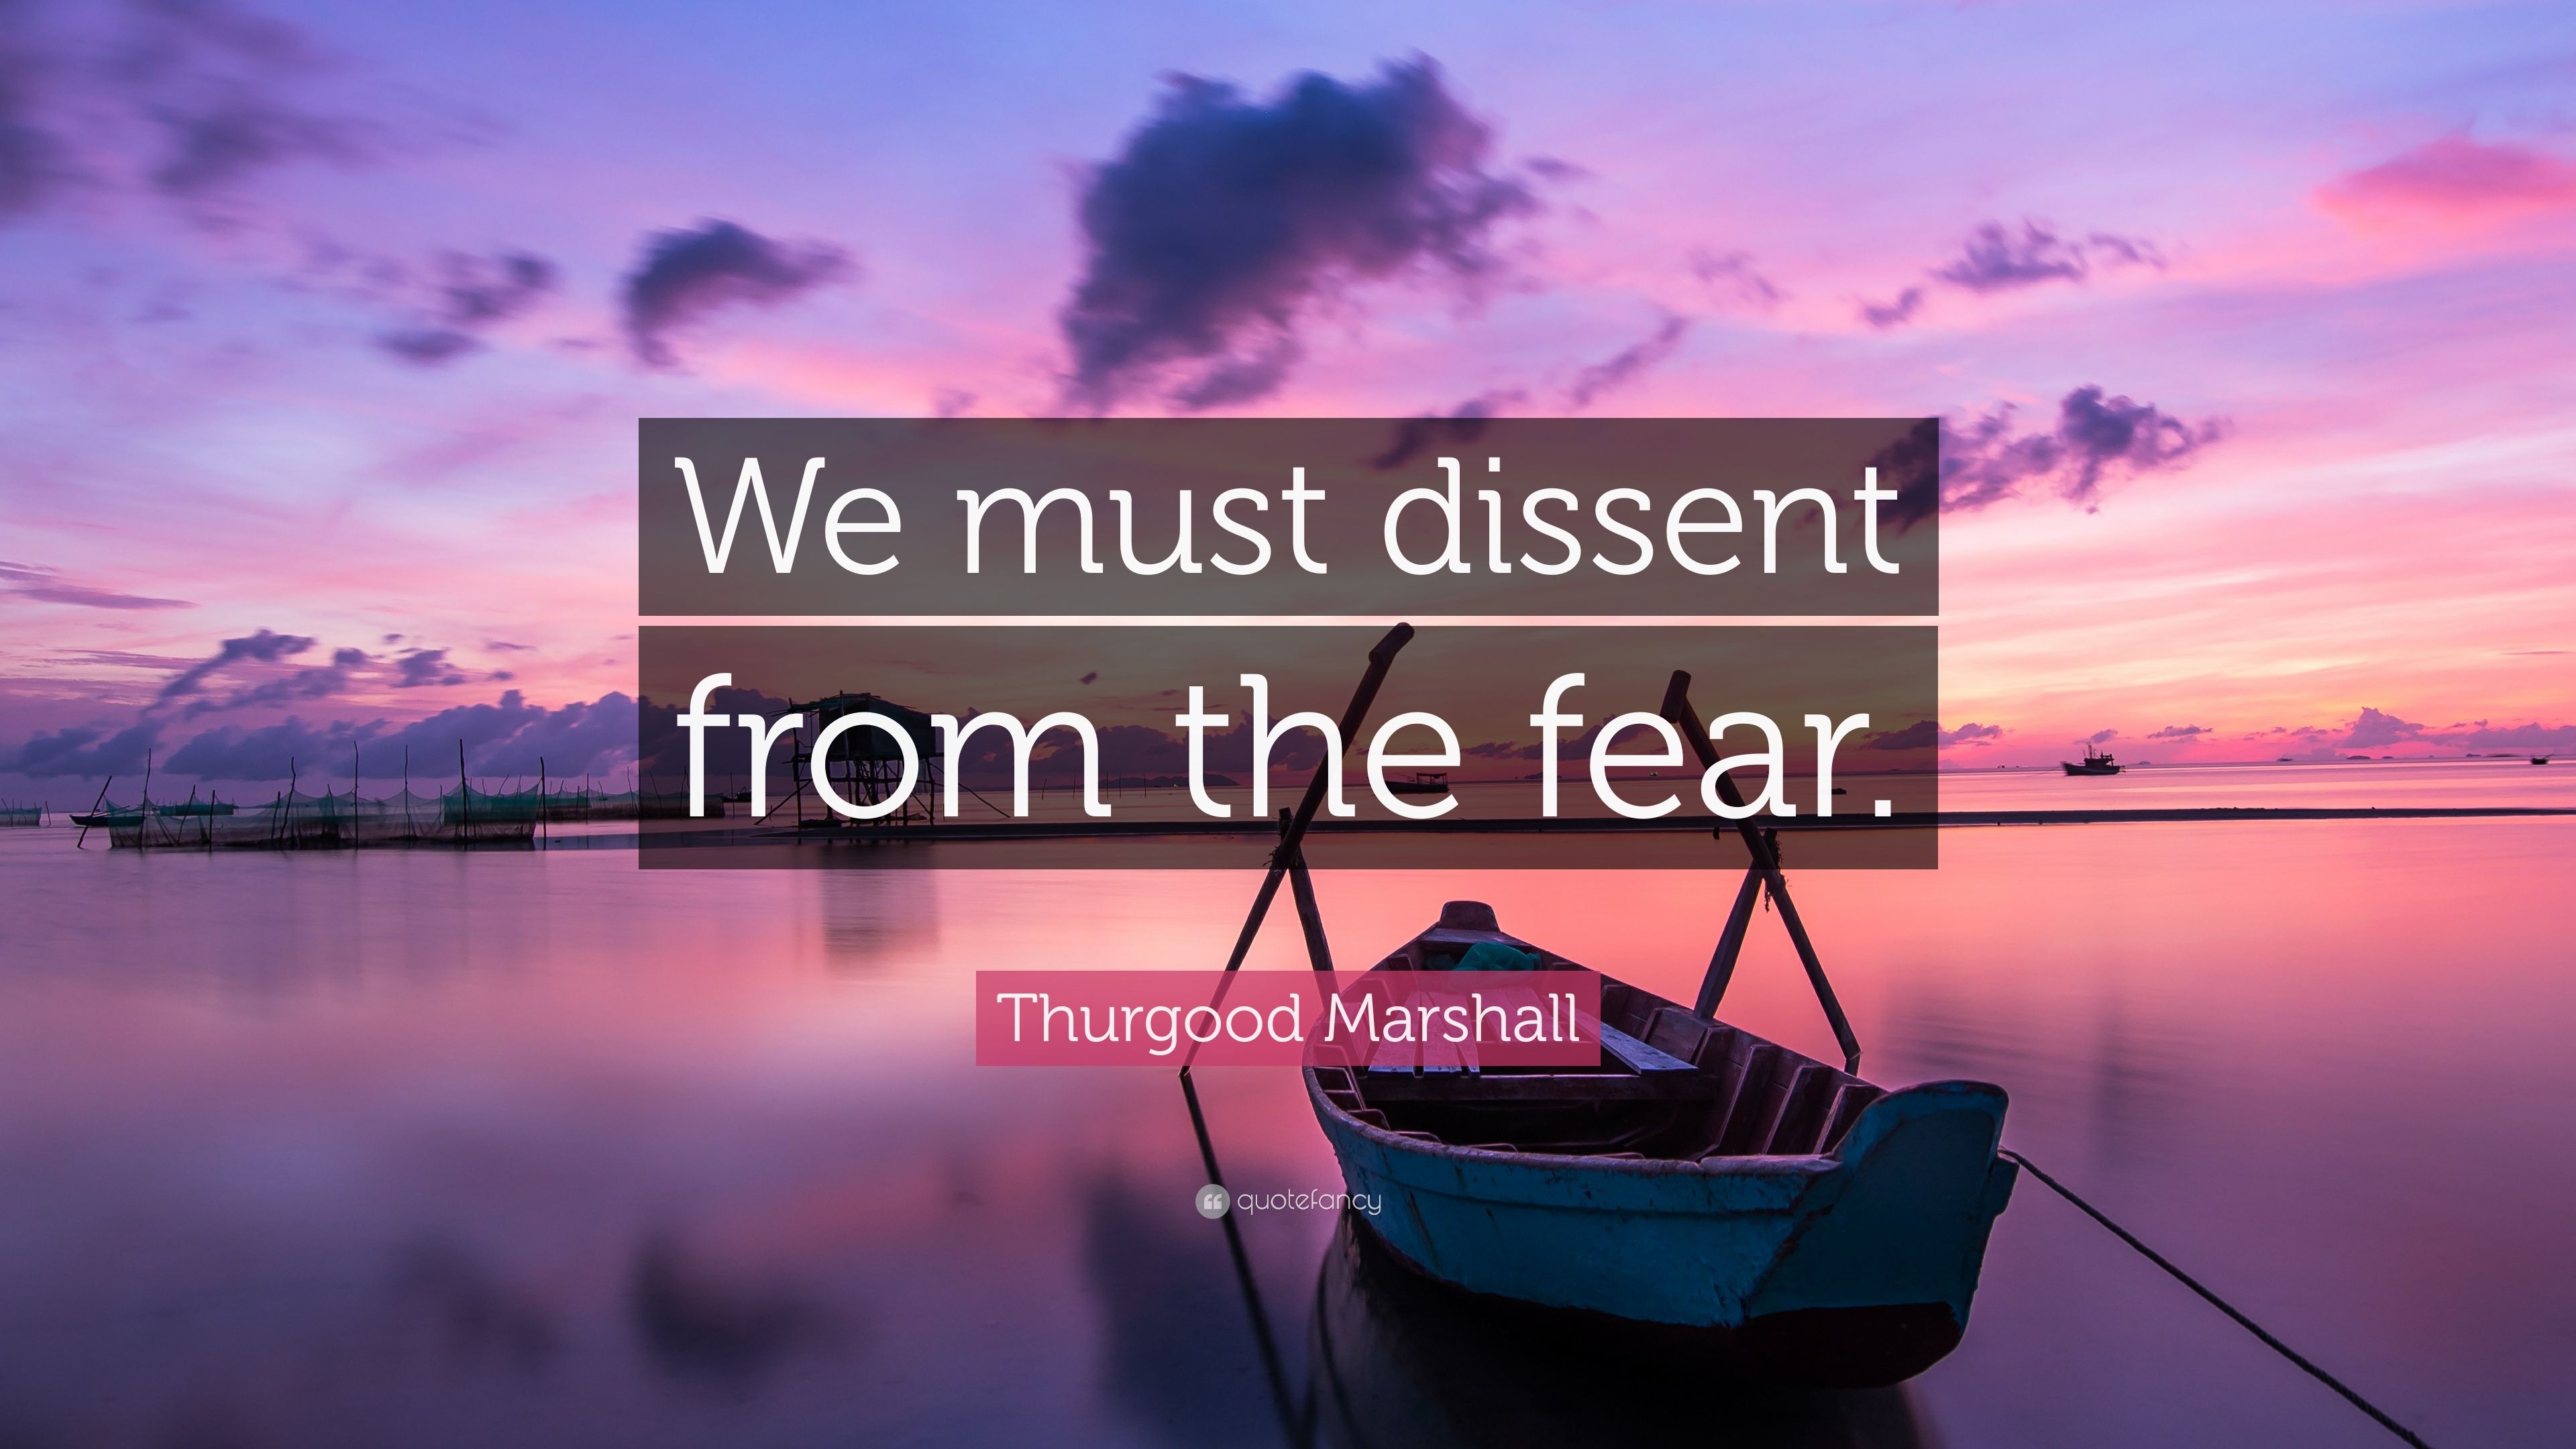 Thurgood Marshall Quotes .quotefancy.com